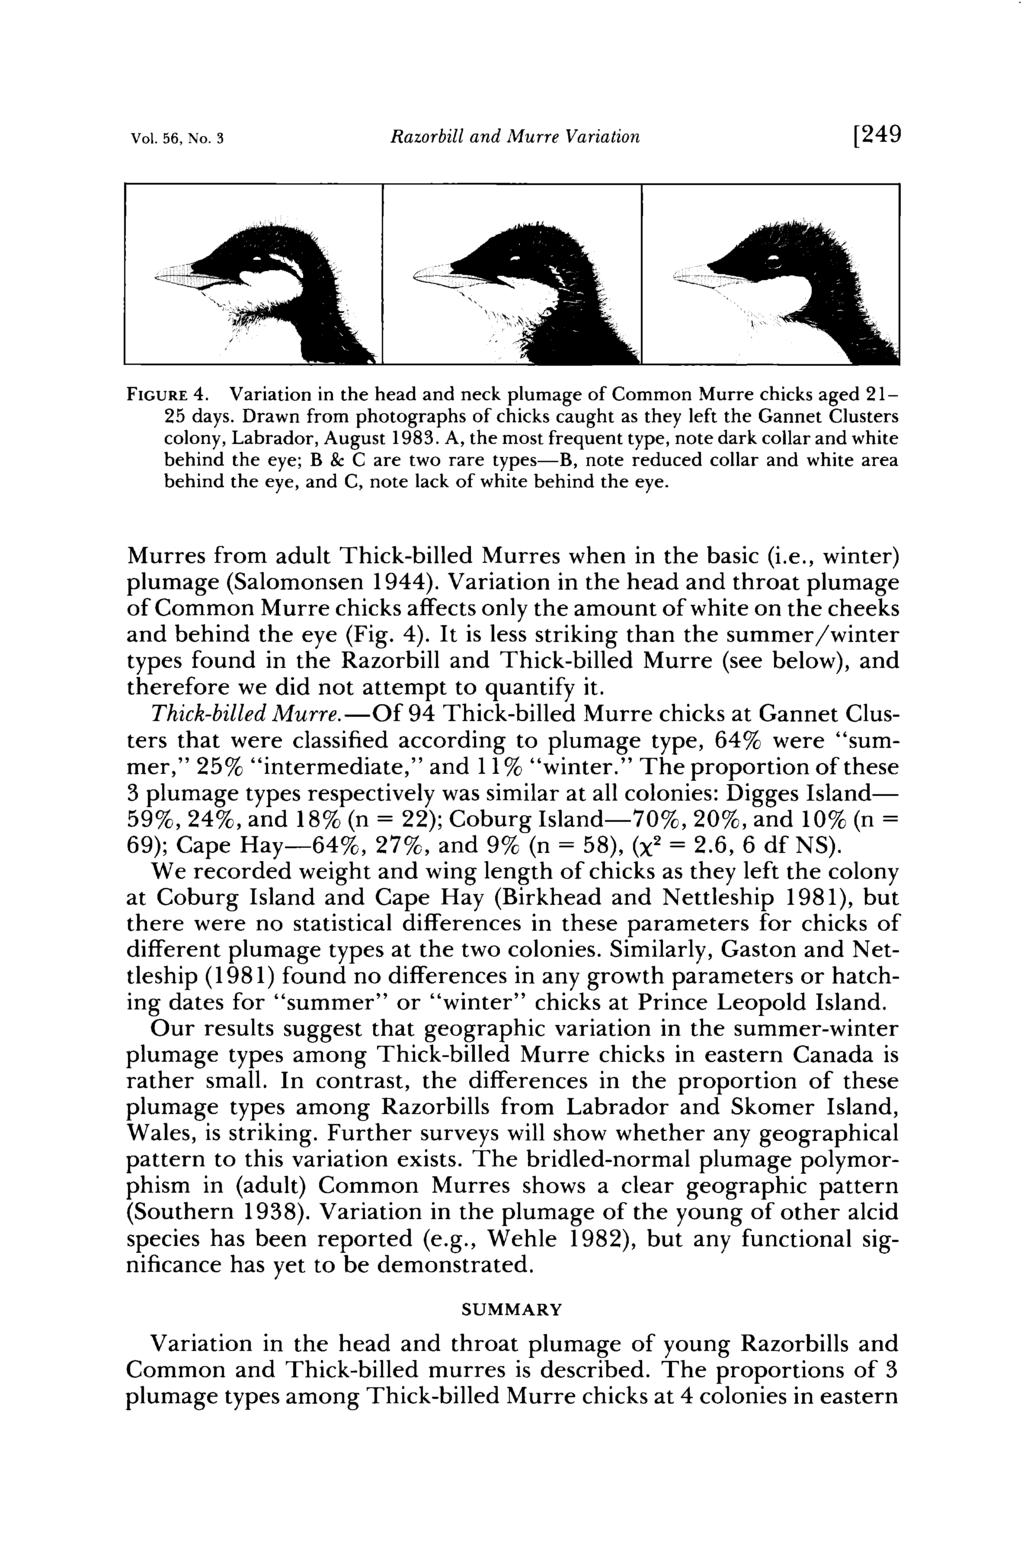 Vol. 56, o. Razorbill and Murre Variation [249 F Ct RE 4. Variation in the head and neck plumage of Common Murre chicks aged 21-25 days.